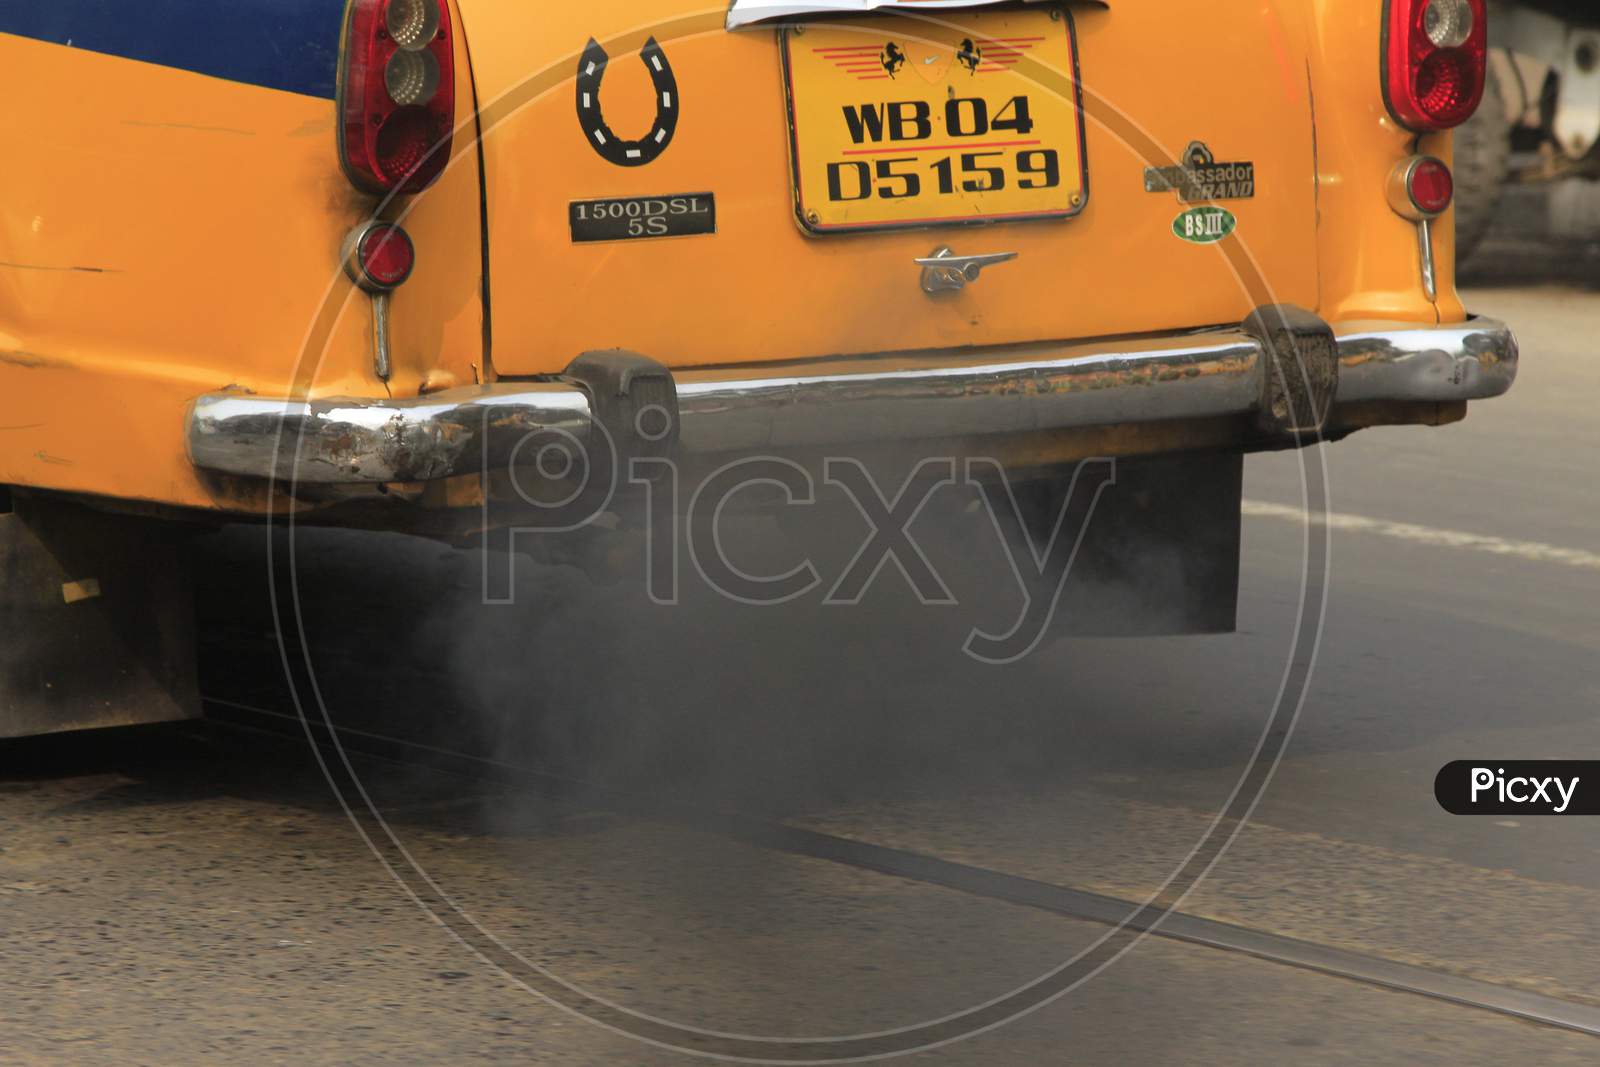 Exhaust smoke coming out from a Taxi